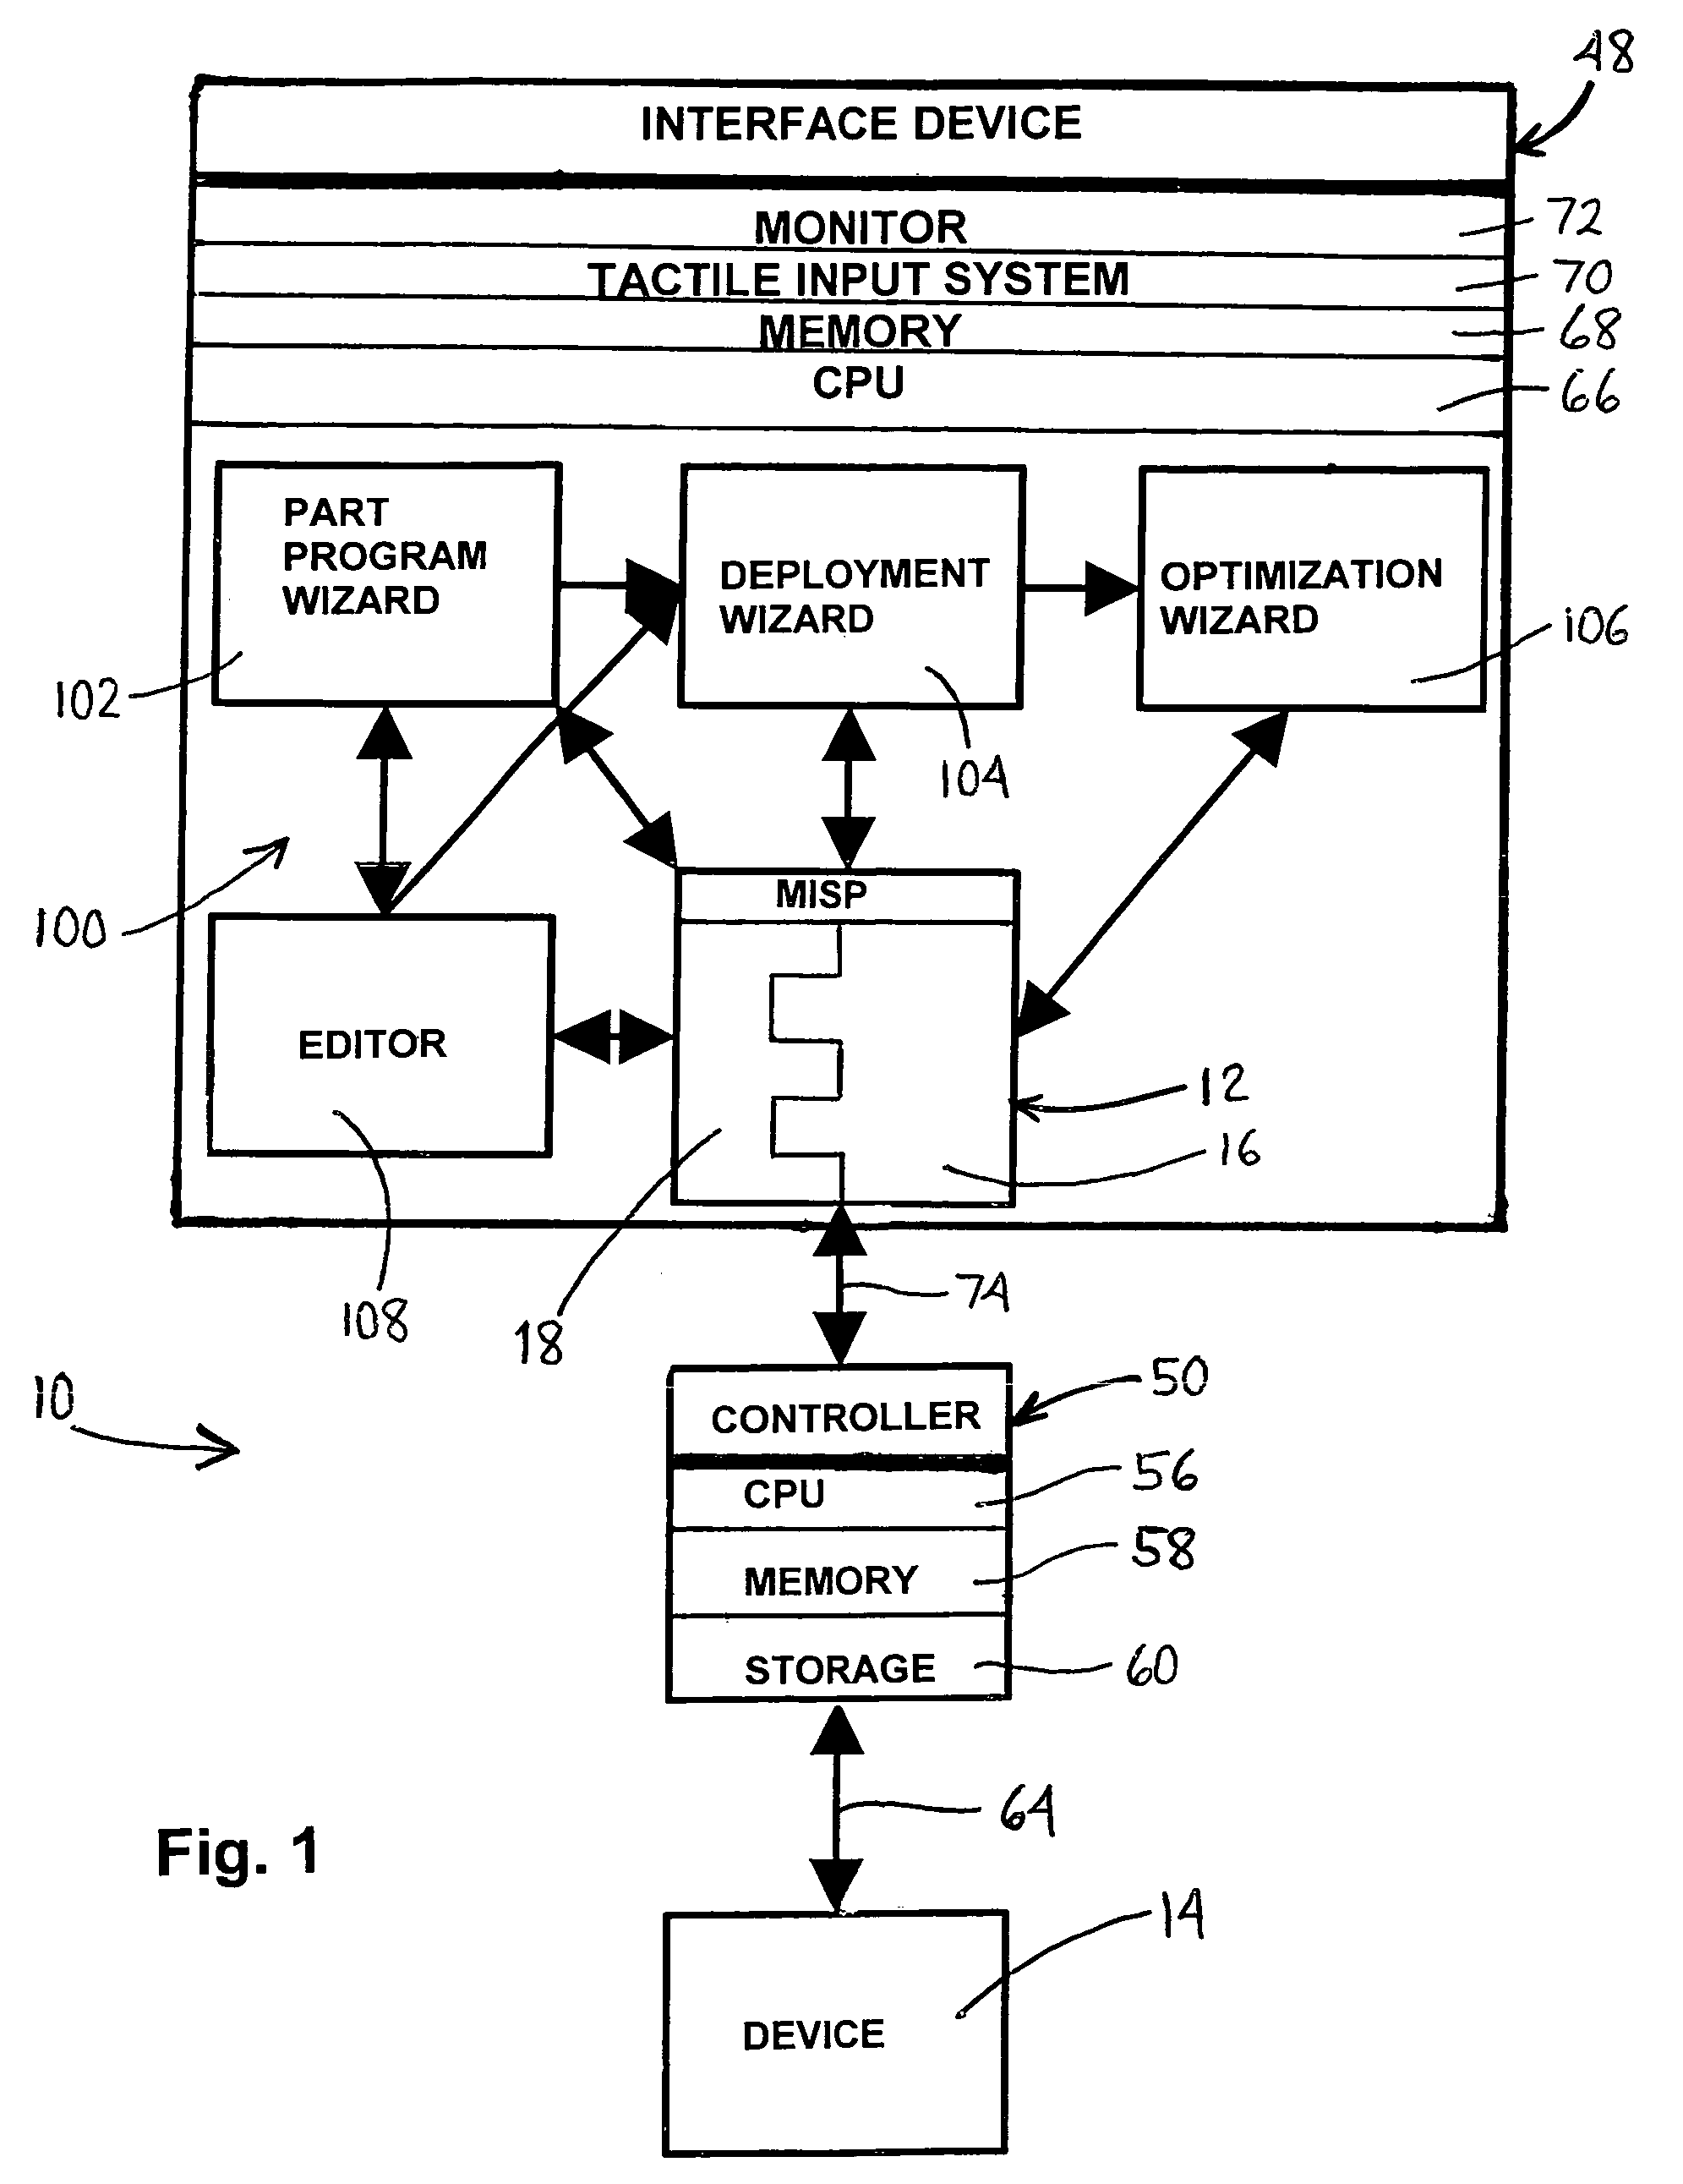 Method and apparatus for developing a metadata-infused software program for controlling a robot